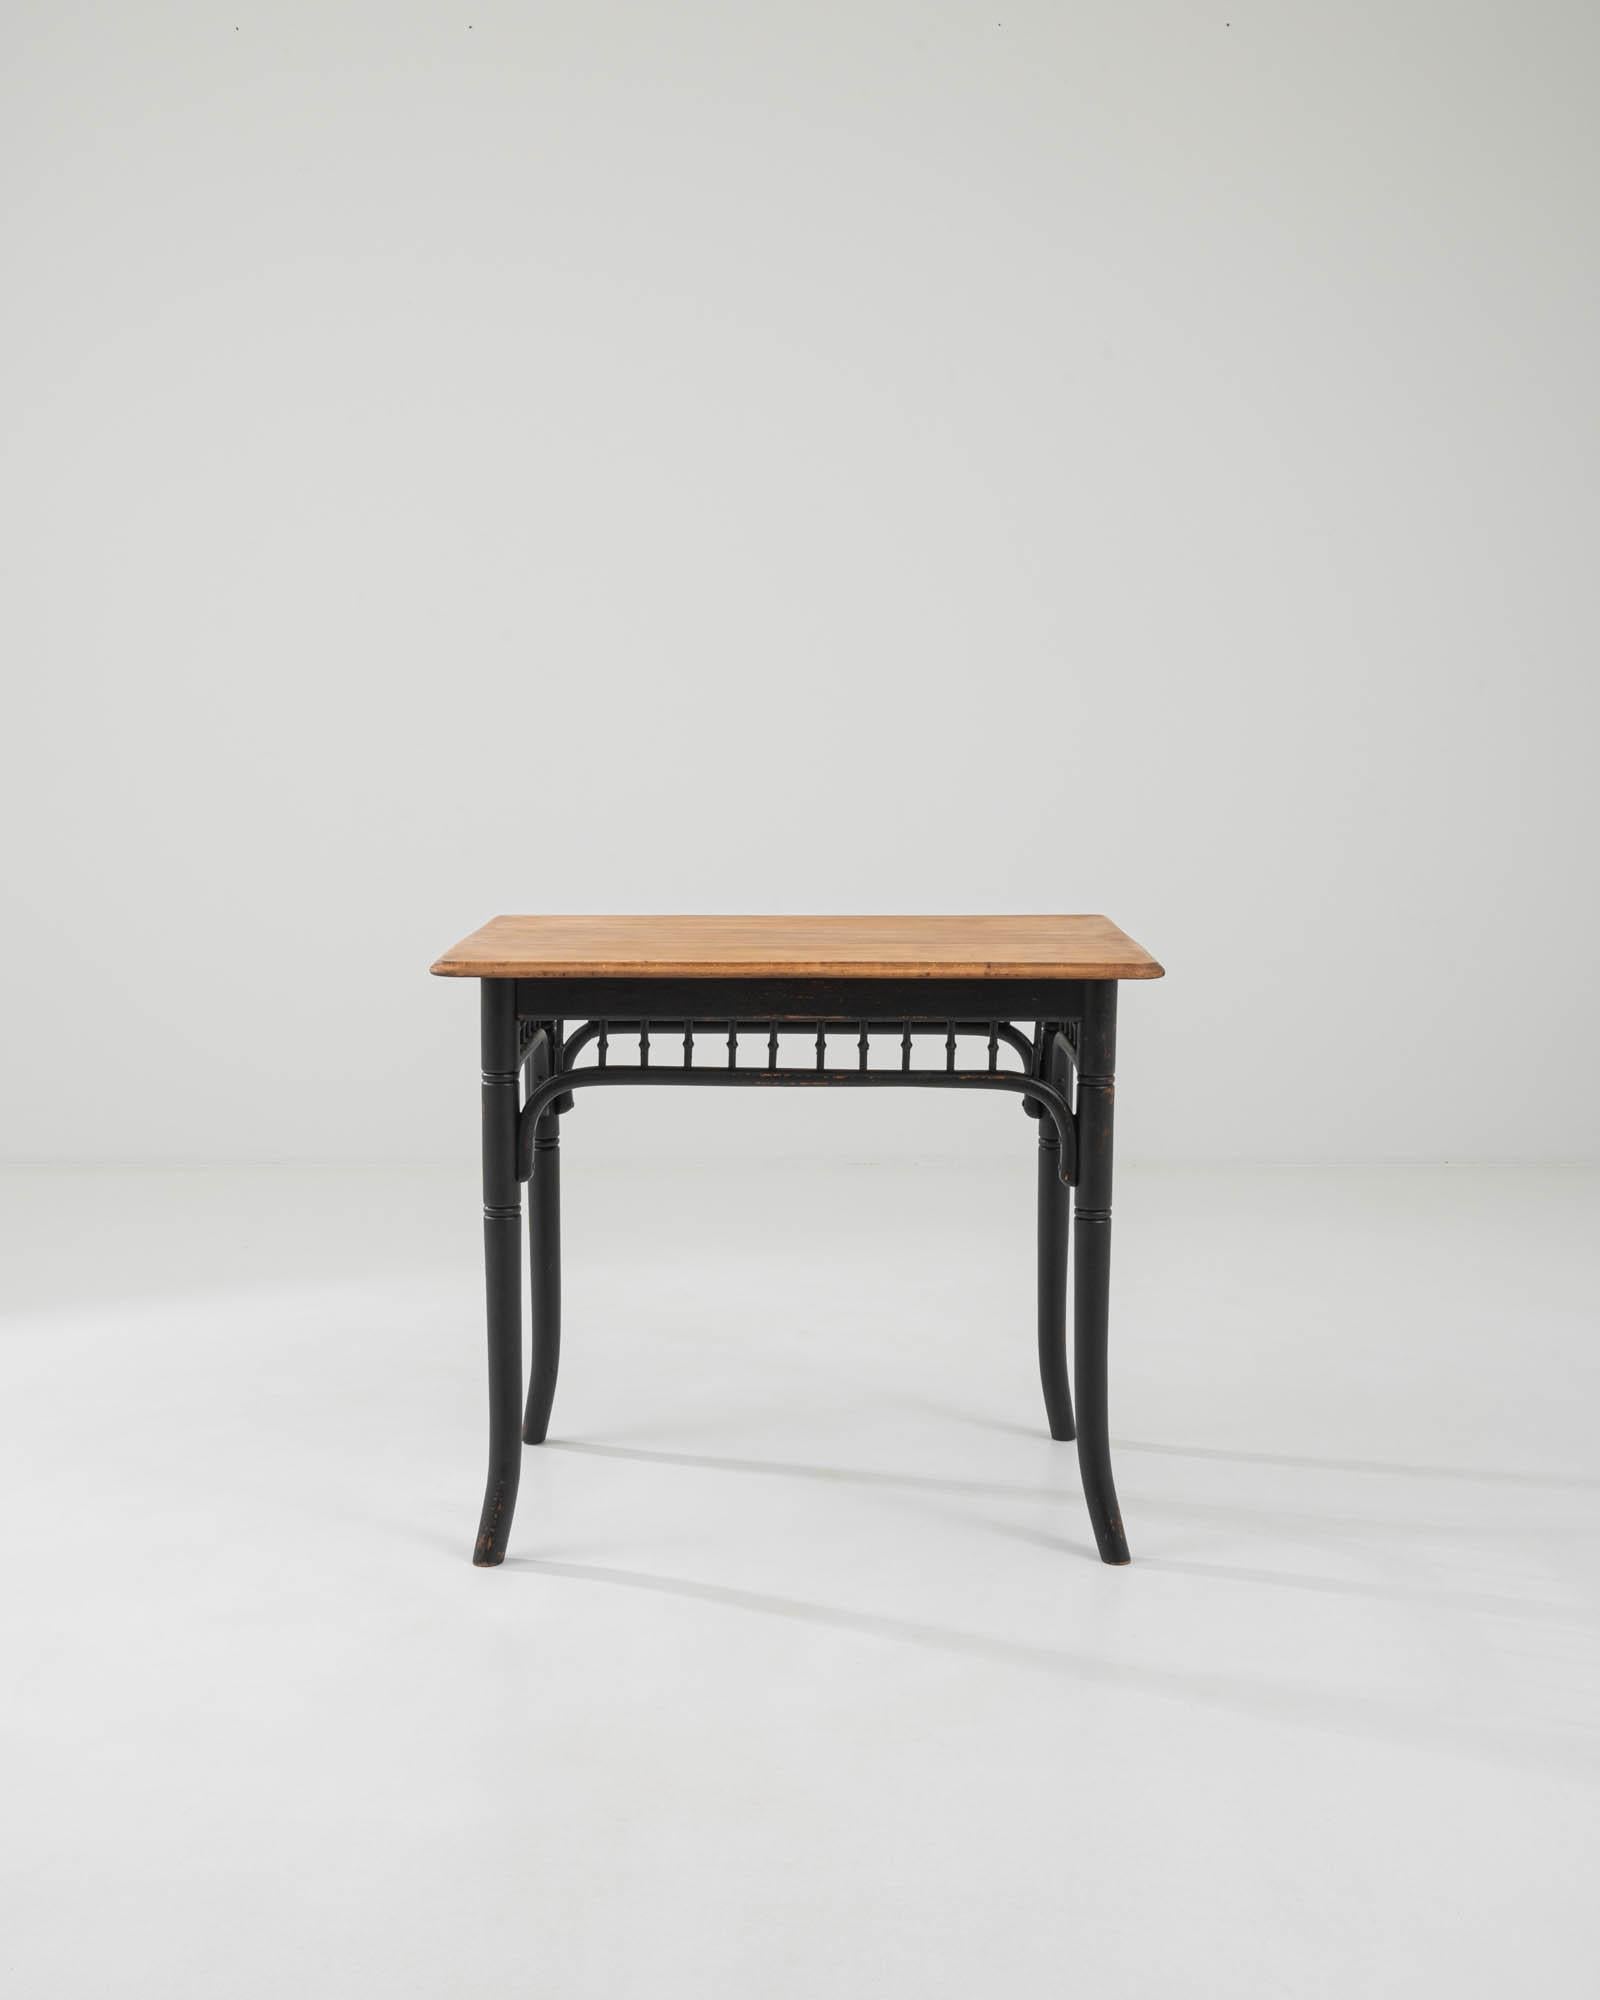 A wooden side table created in early 20th century Austria, in the style of Thonet. At first simple and unassuming, this elegantly understated side table rewards a closer inspection with lovely details and expert craftsmanship. The gently curved and